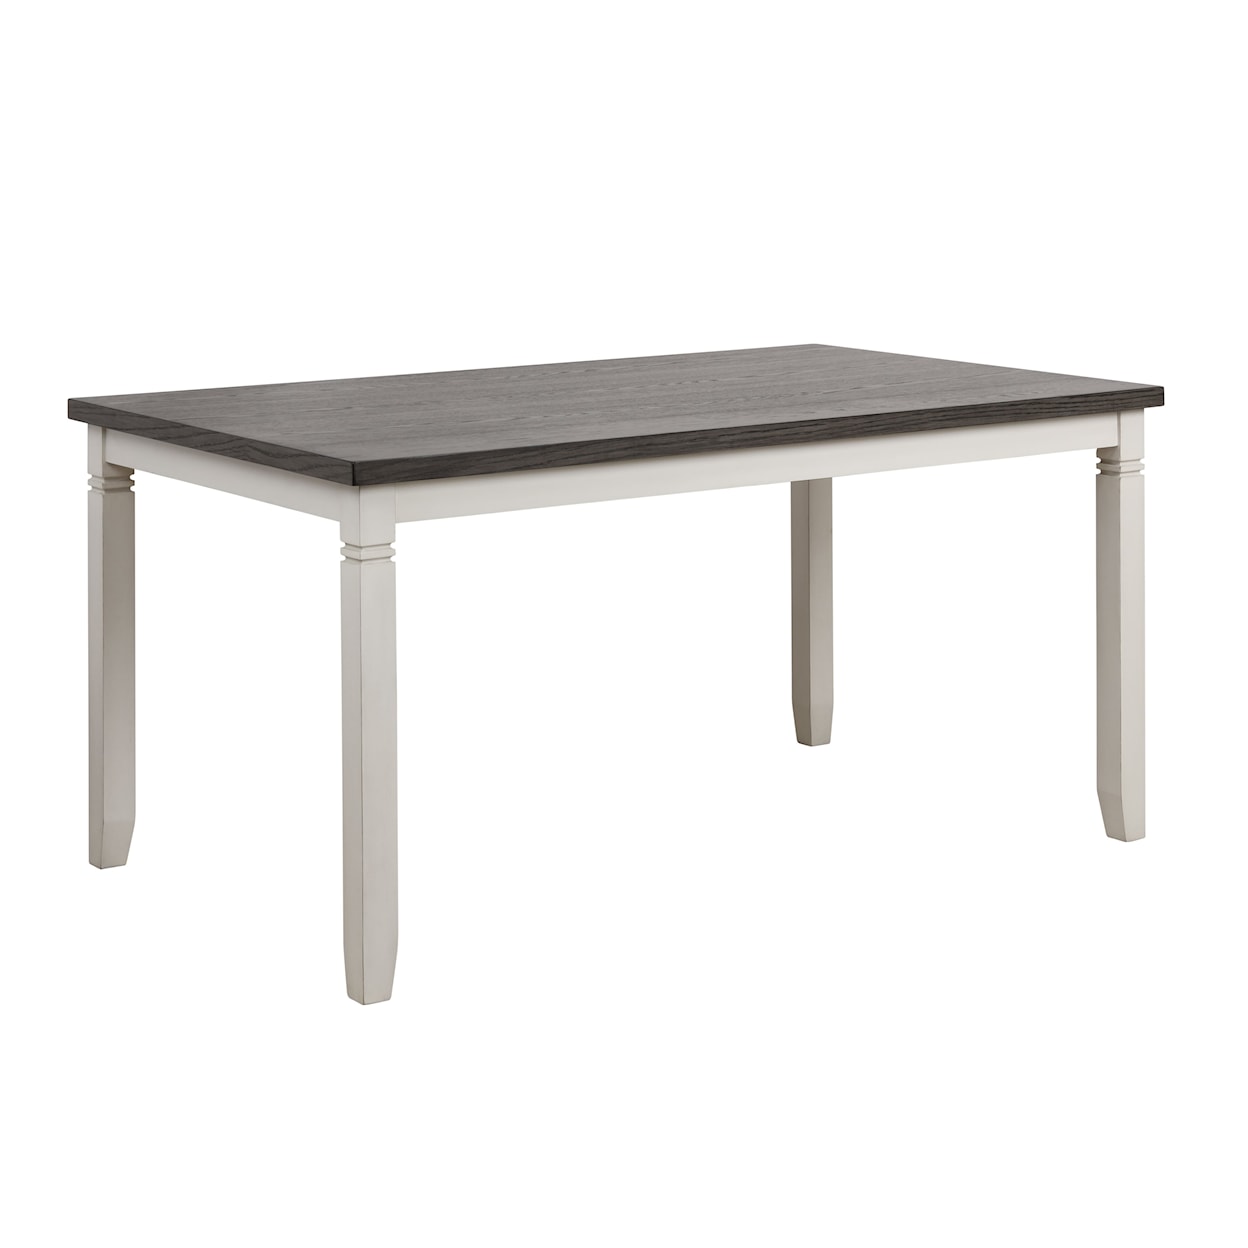 Lifestyle 8615D Dining Table